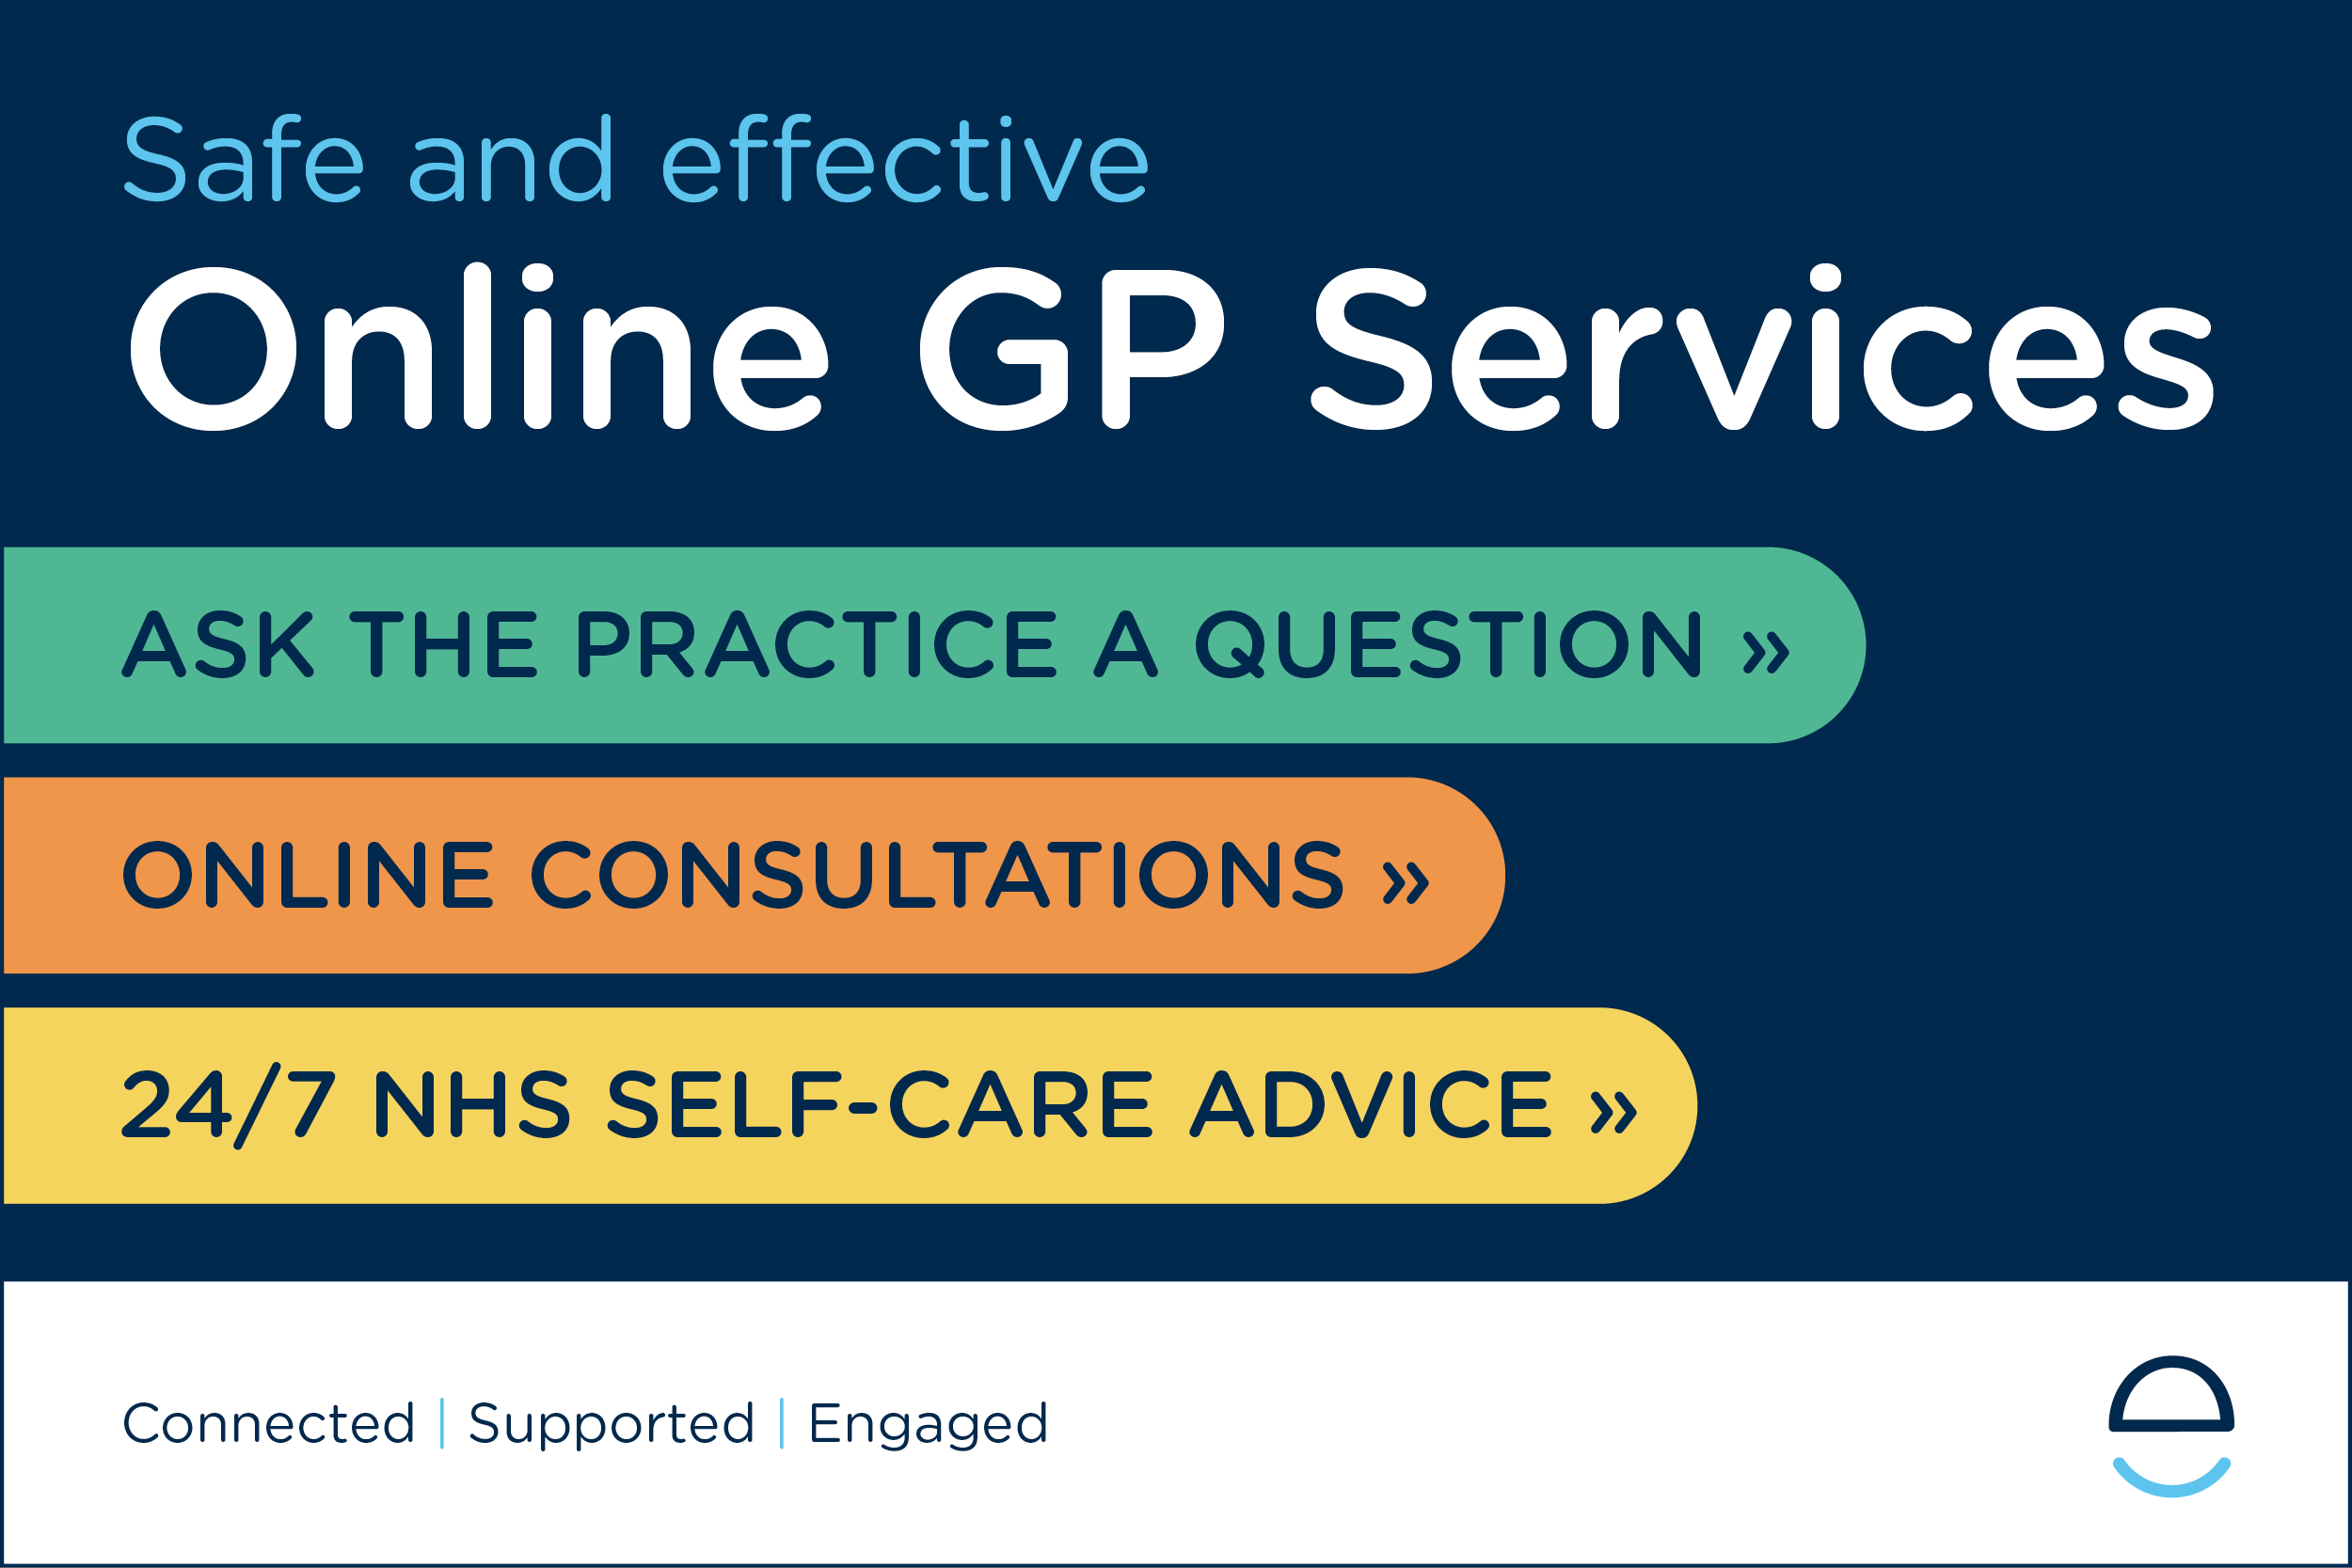 Safe and effective online GP Services. Ask the practice a question. Online consultations. 24 7 NHS self care advice